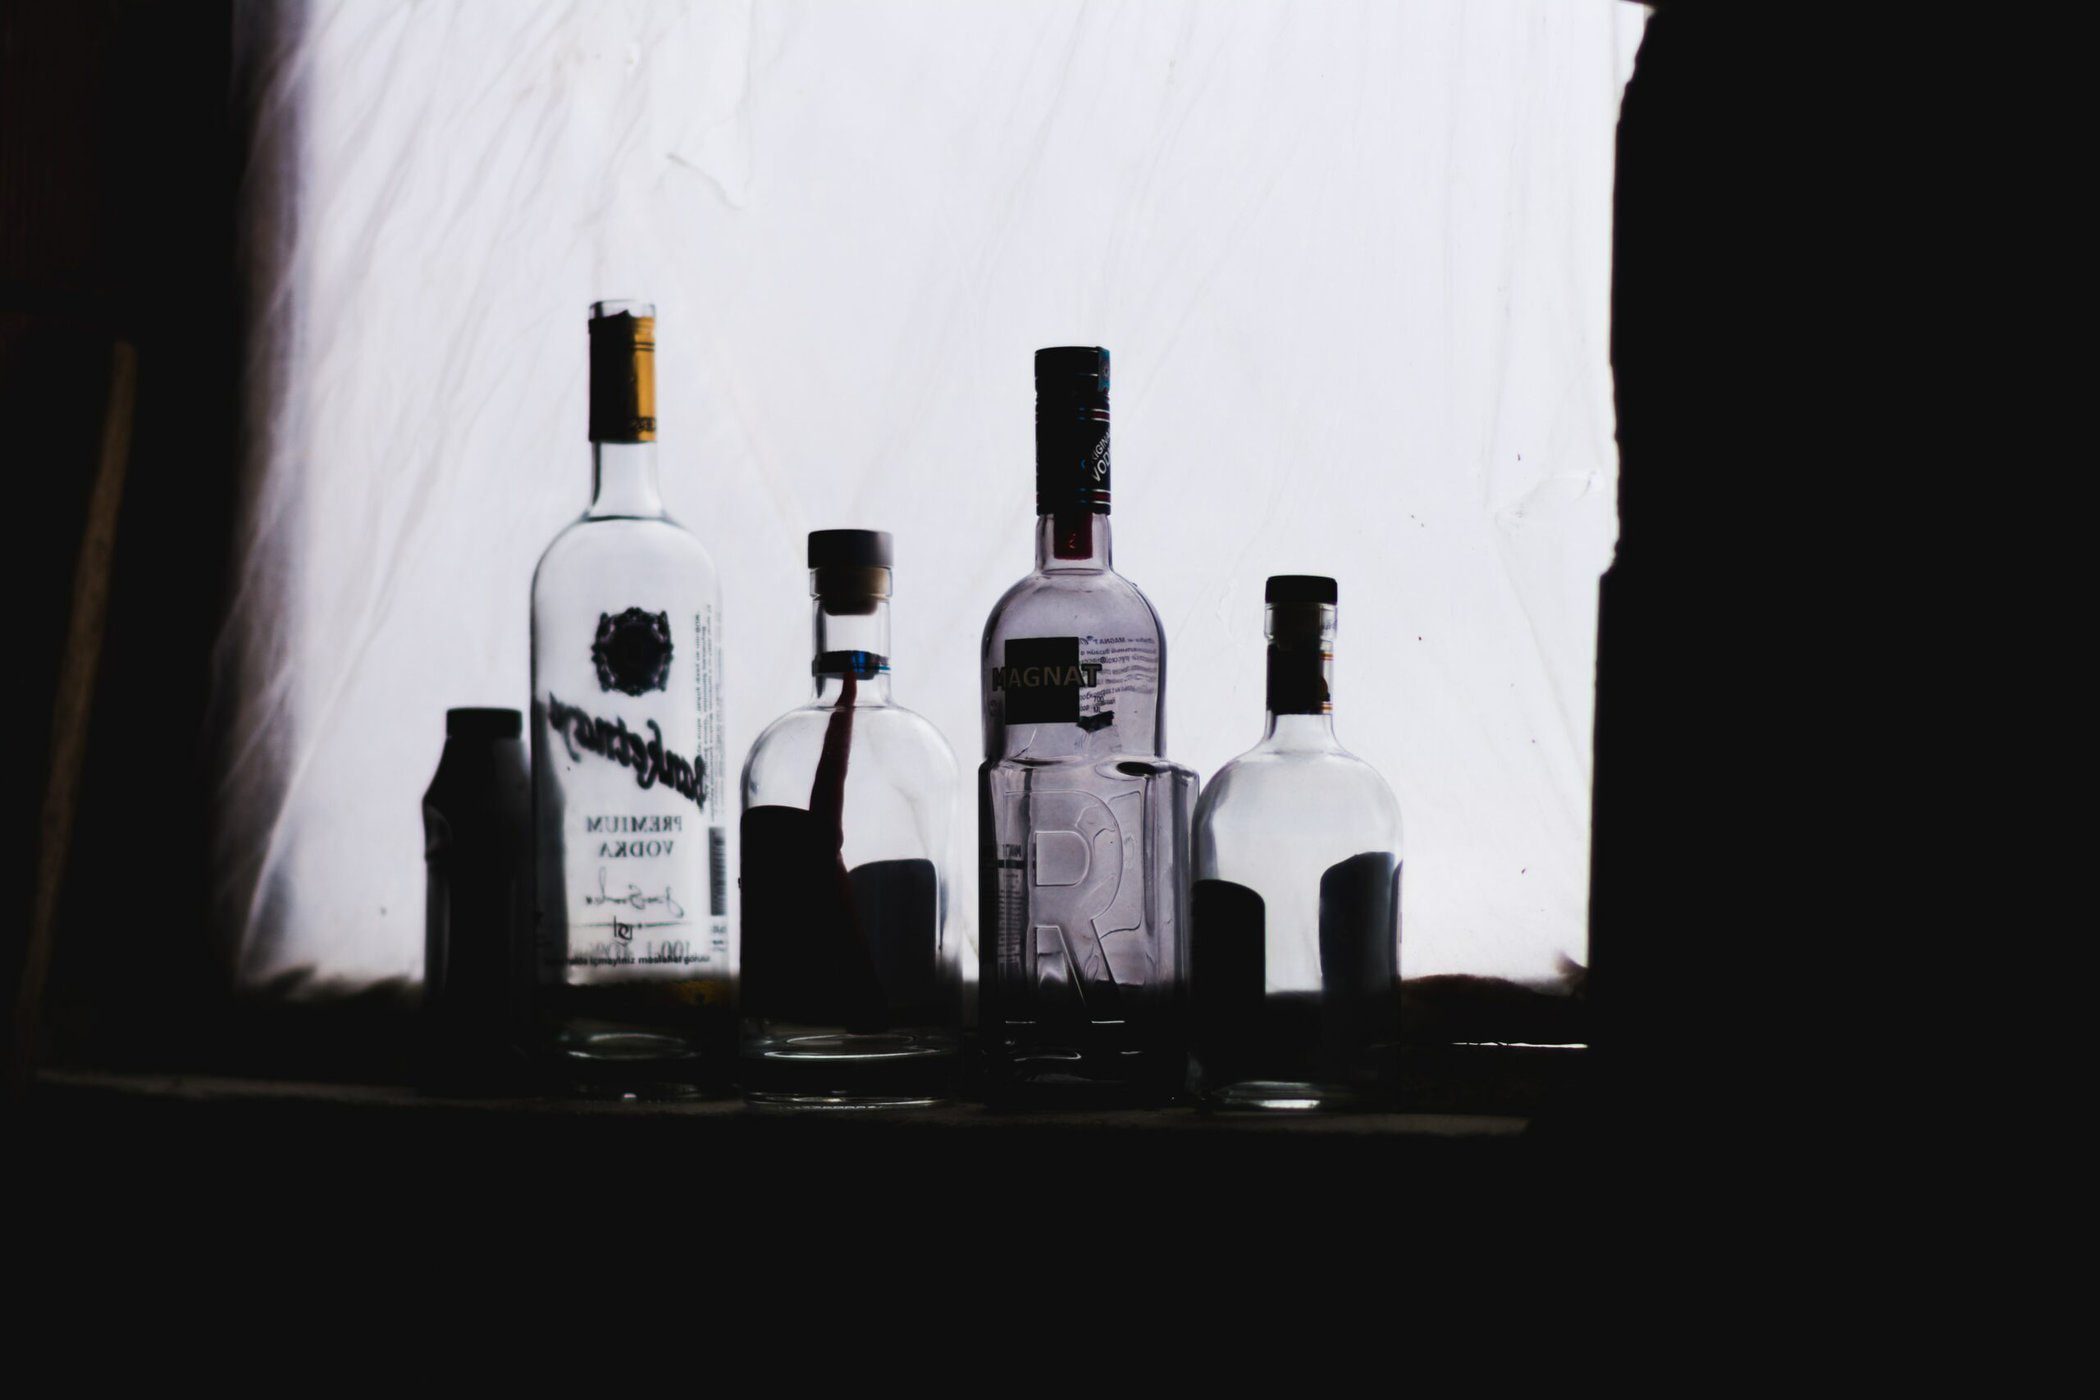 An image of empty alcohol bottles.